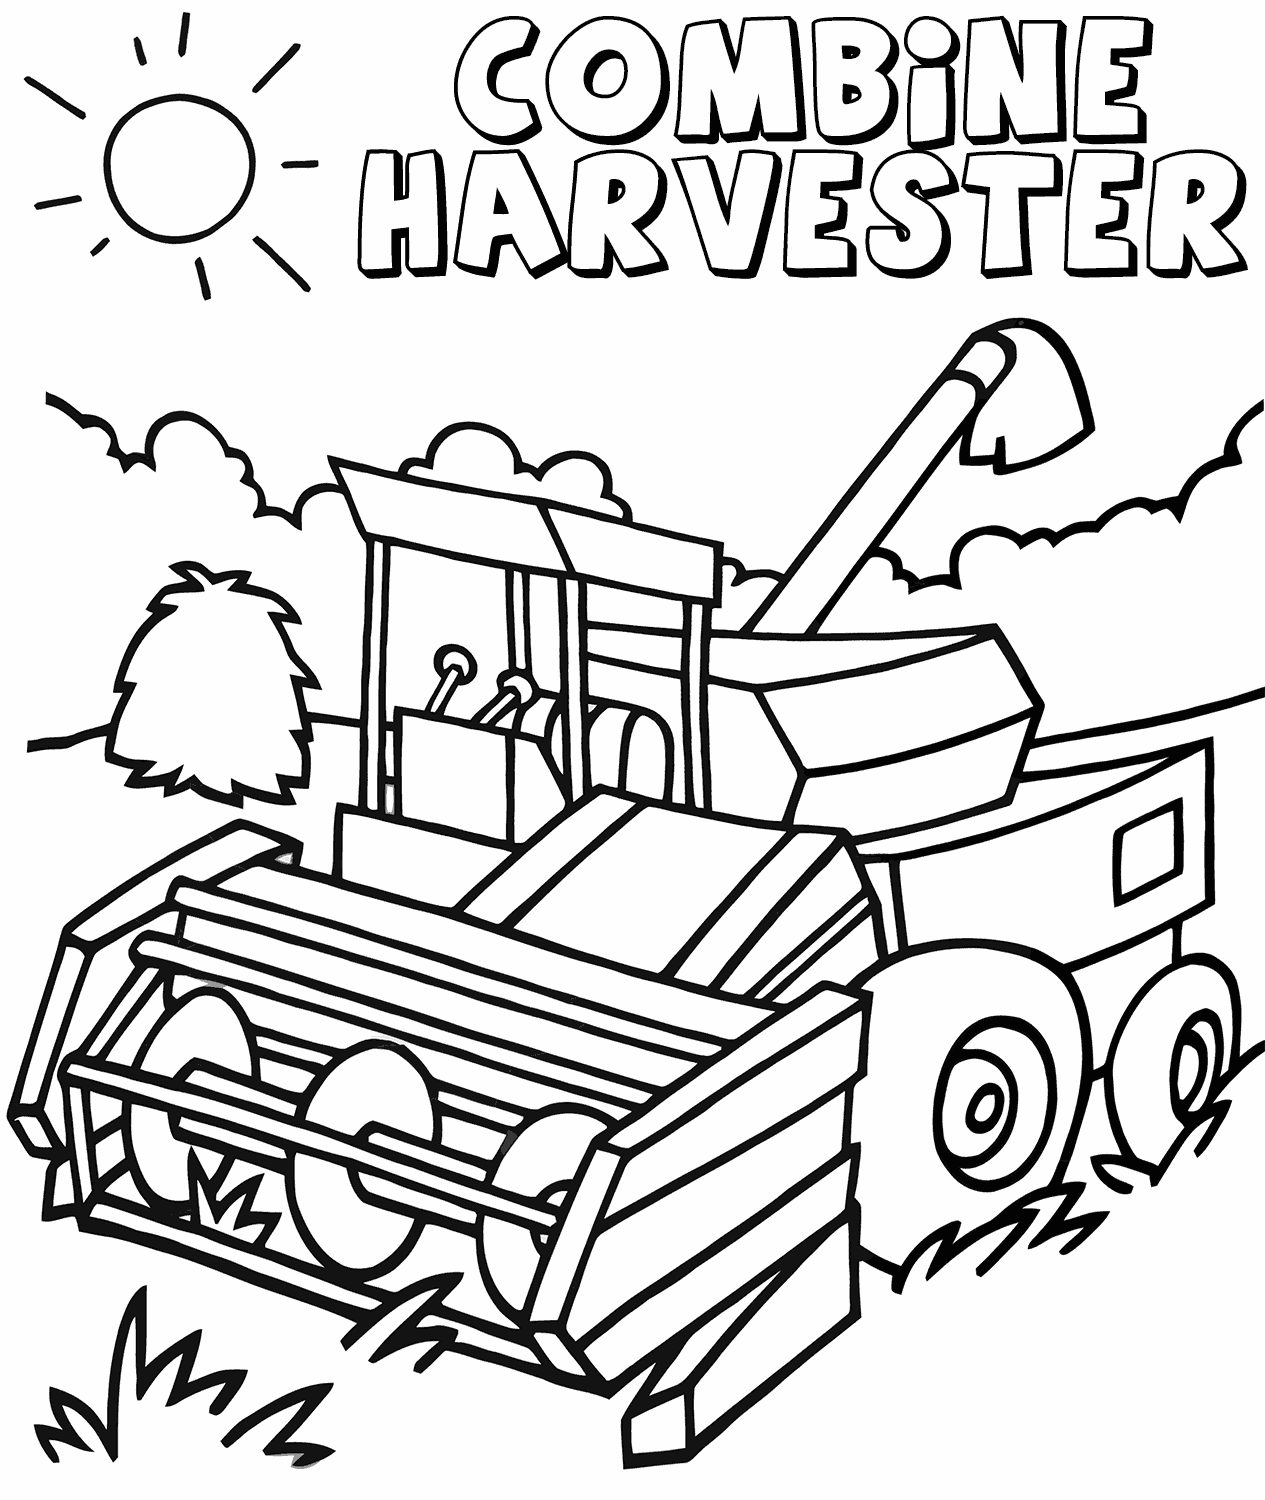 combine harvester colouring pages combine harvester coloring pages coloring pages to harvester pages colouring combine 